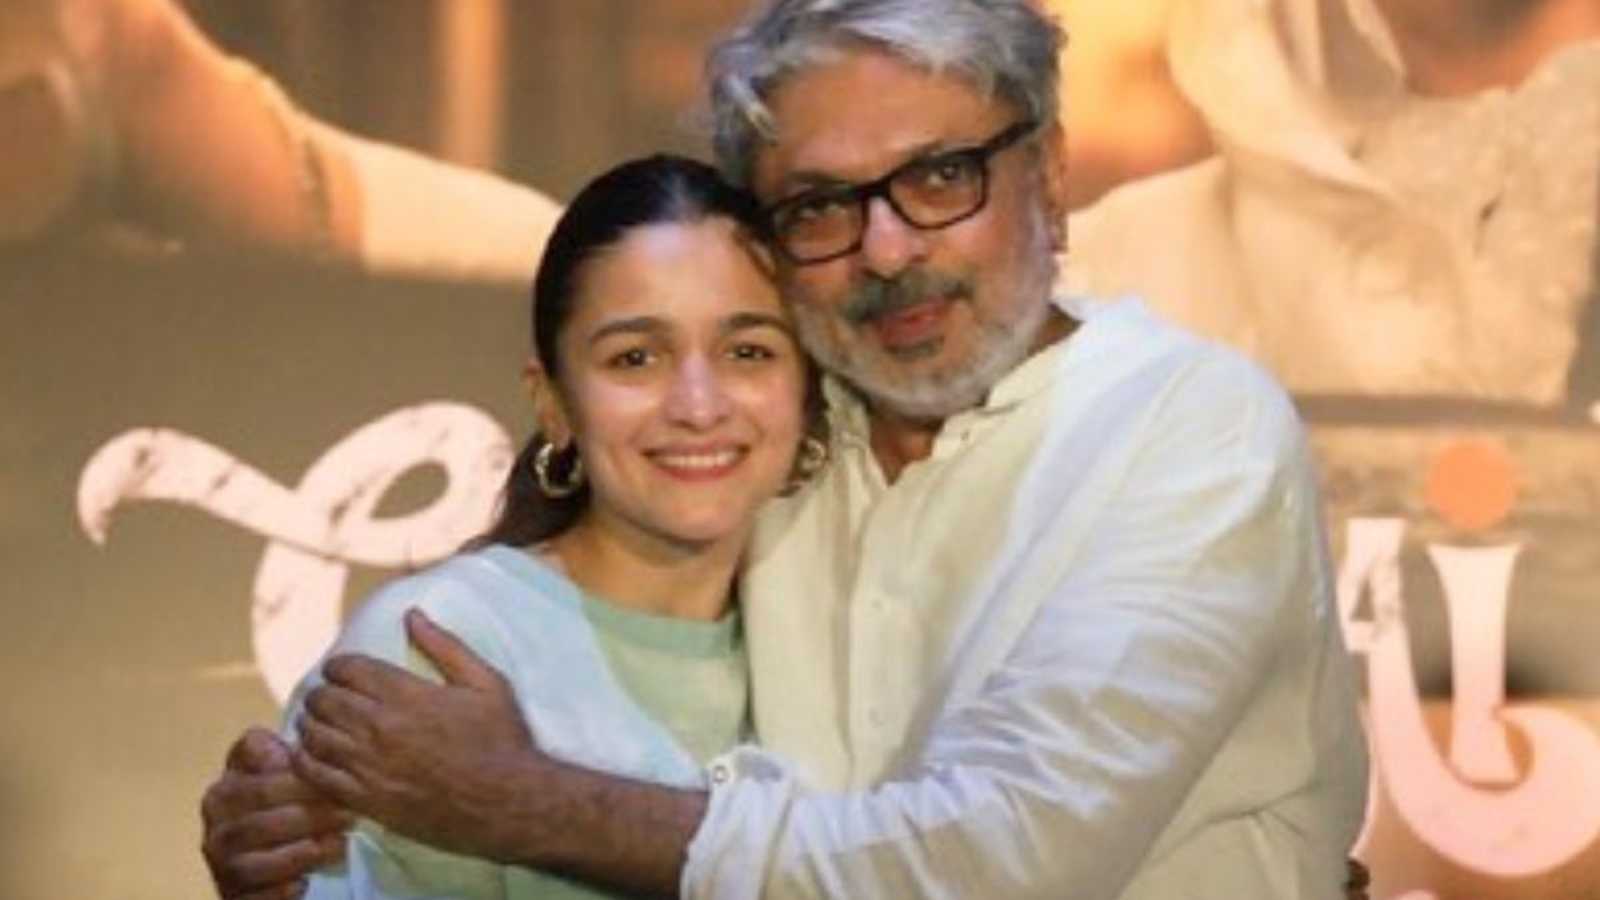 After RRR, Gangubai Kathiwadi becomes Alia Bhatt's second film to join the Oscars 2023 race to be entered for all major categories